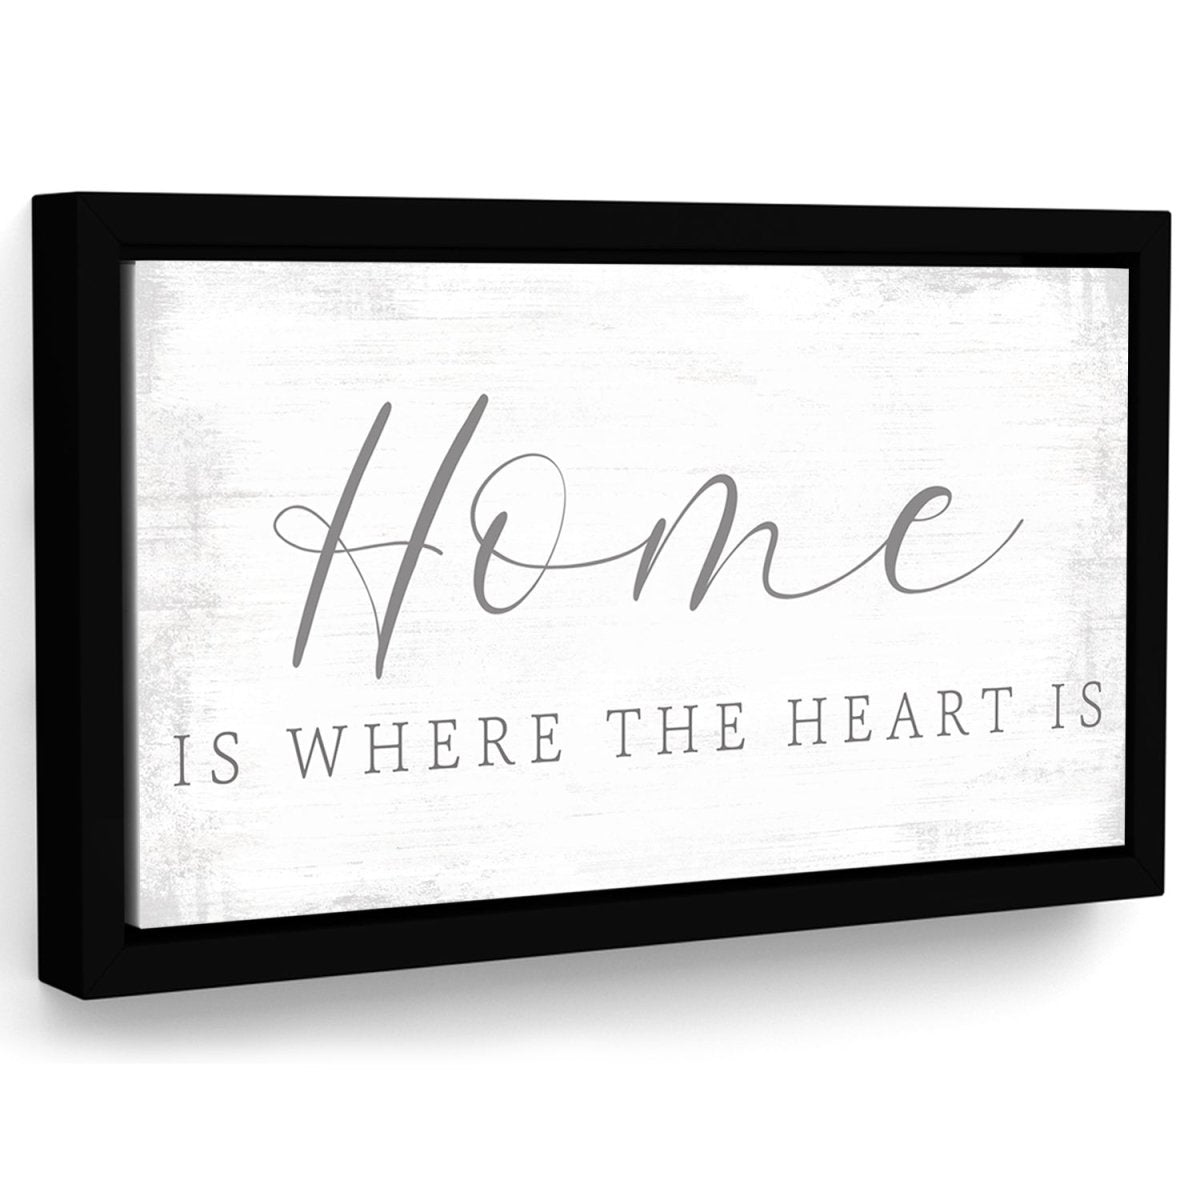 Home Is Where The Heart Is Sign - Pretty Perfect Studio